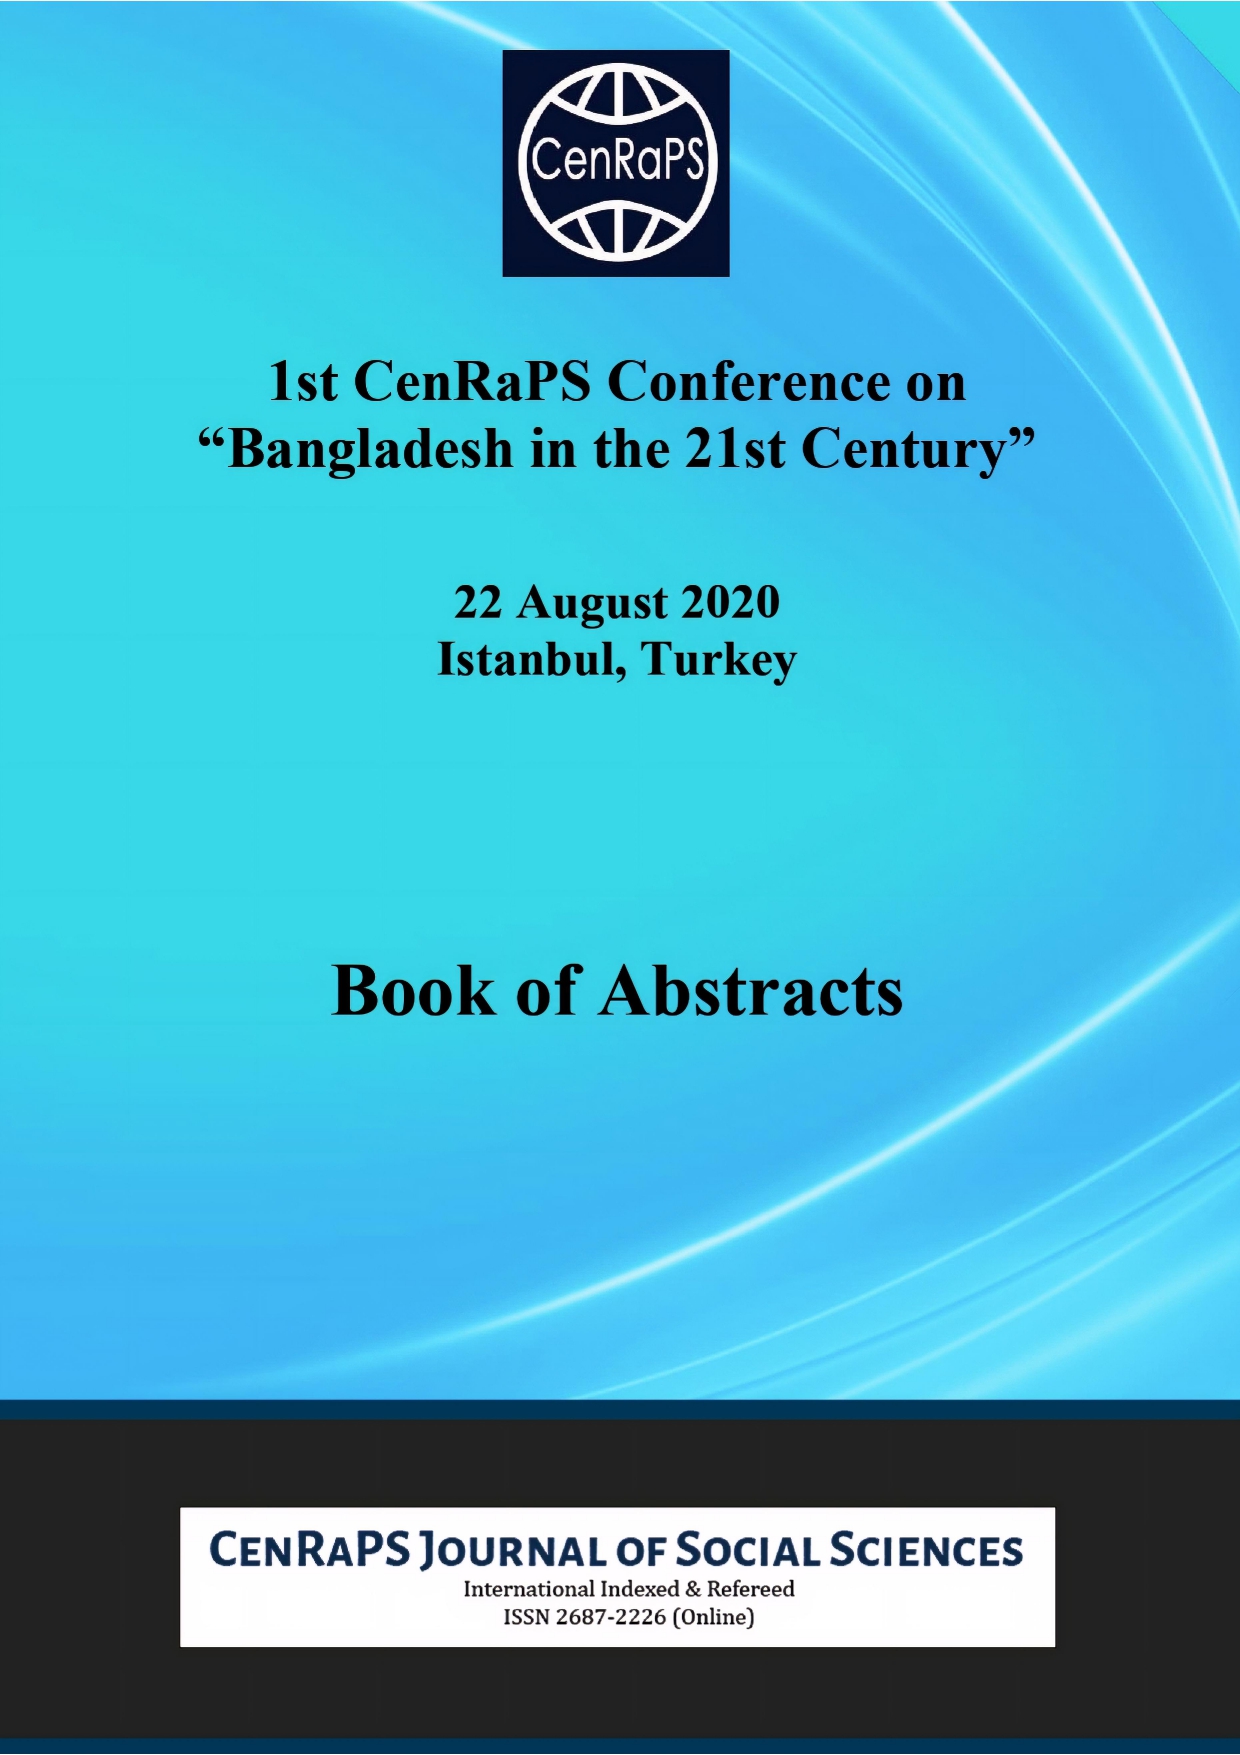 					View 2020: 1st CenRaPS Conference on “Bangladesh in the 21st Century” Book of Abstracts
				